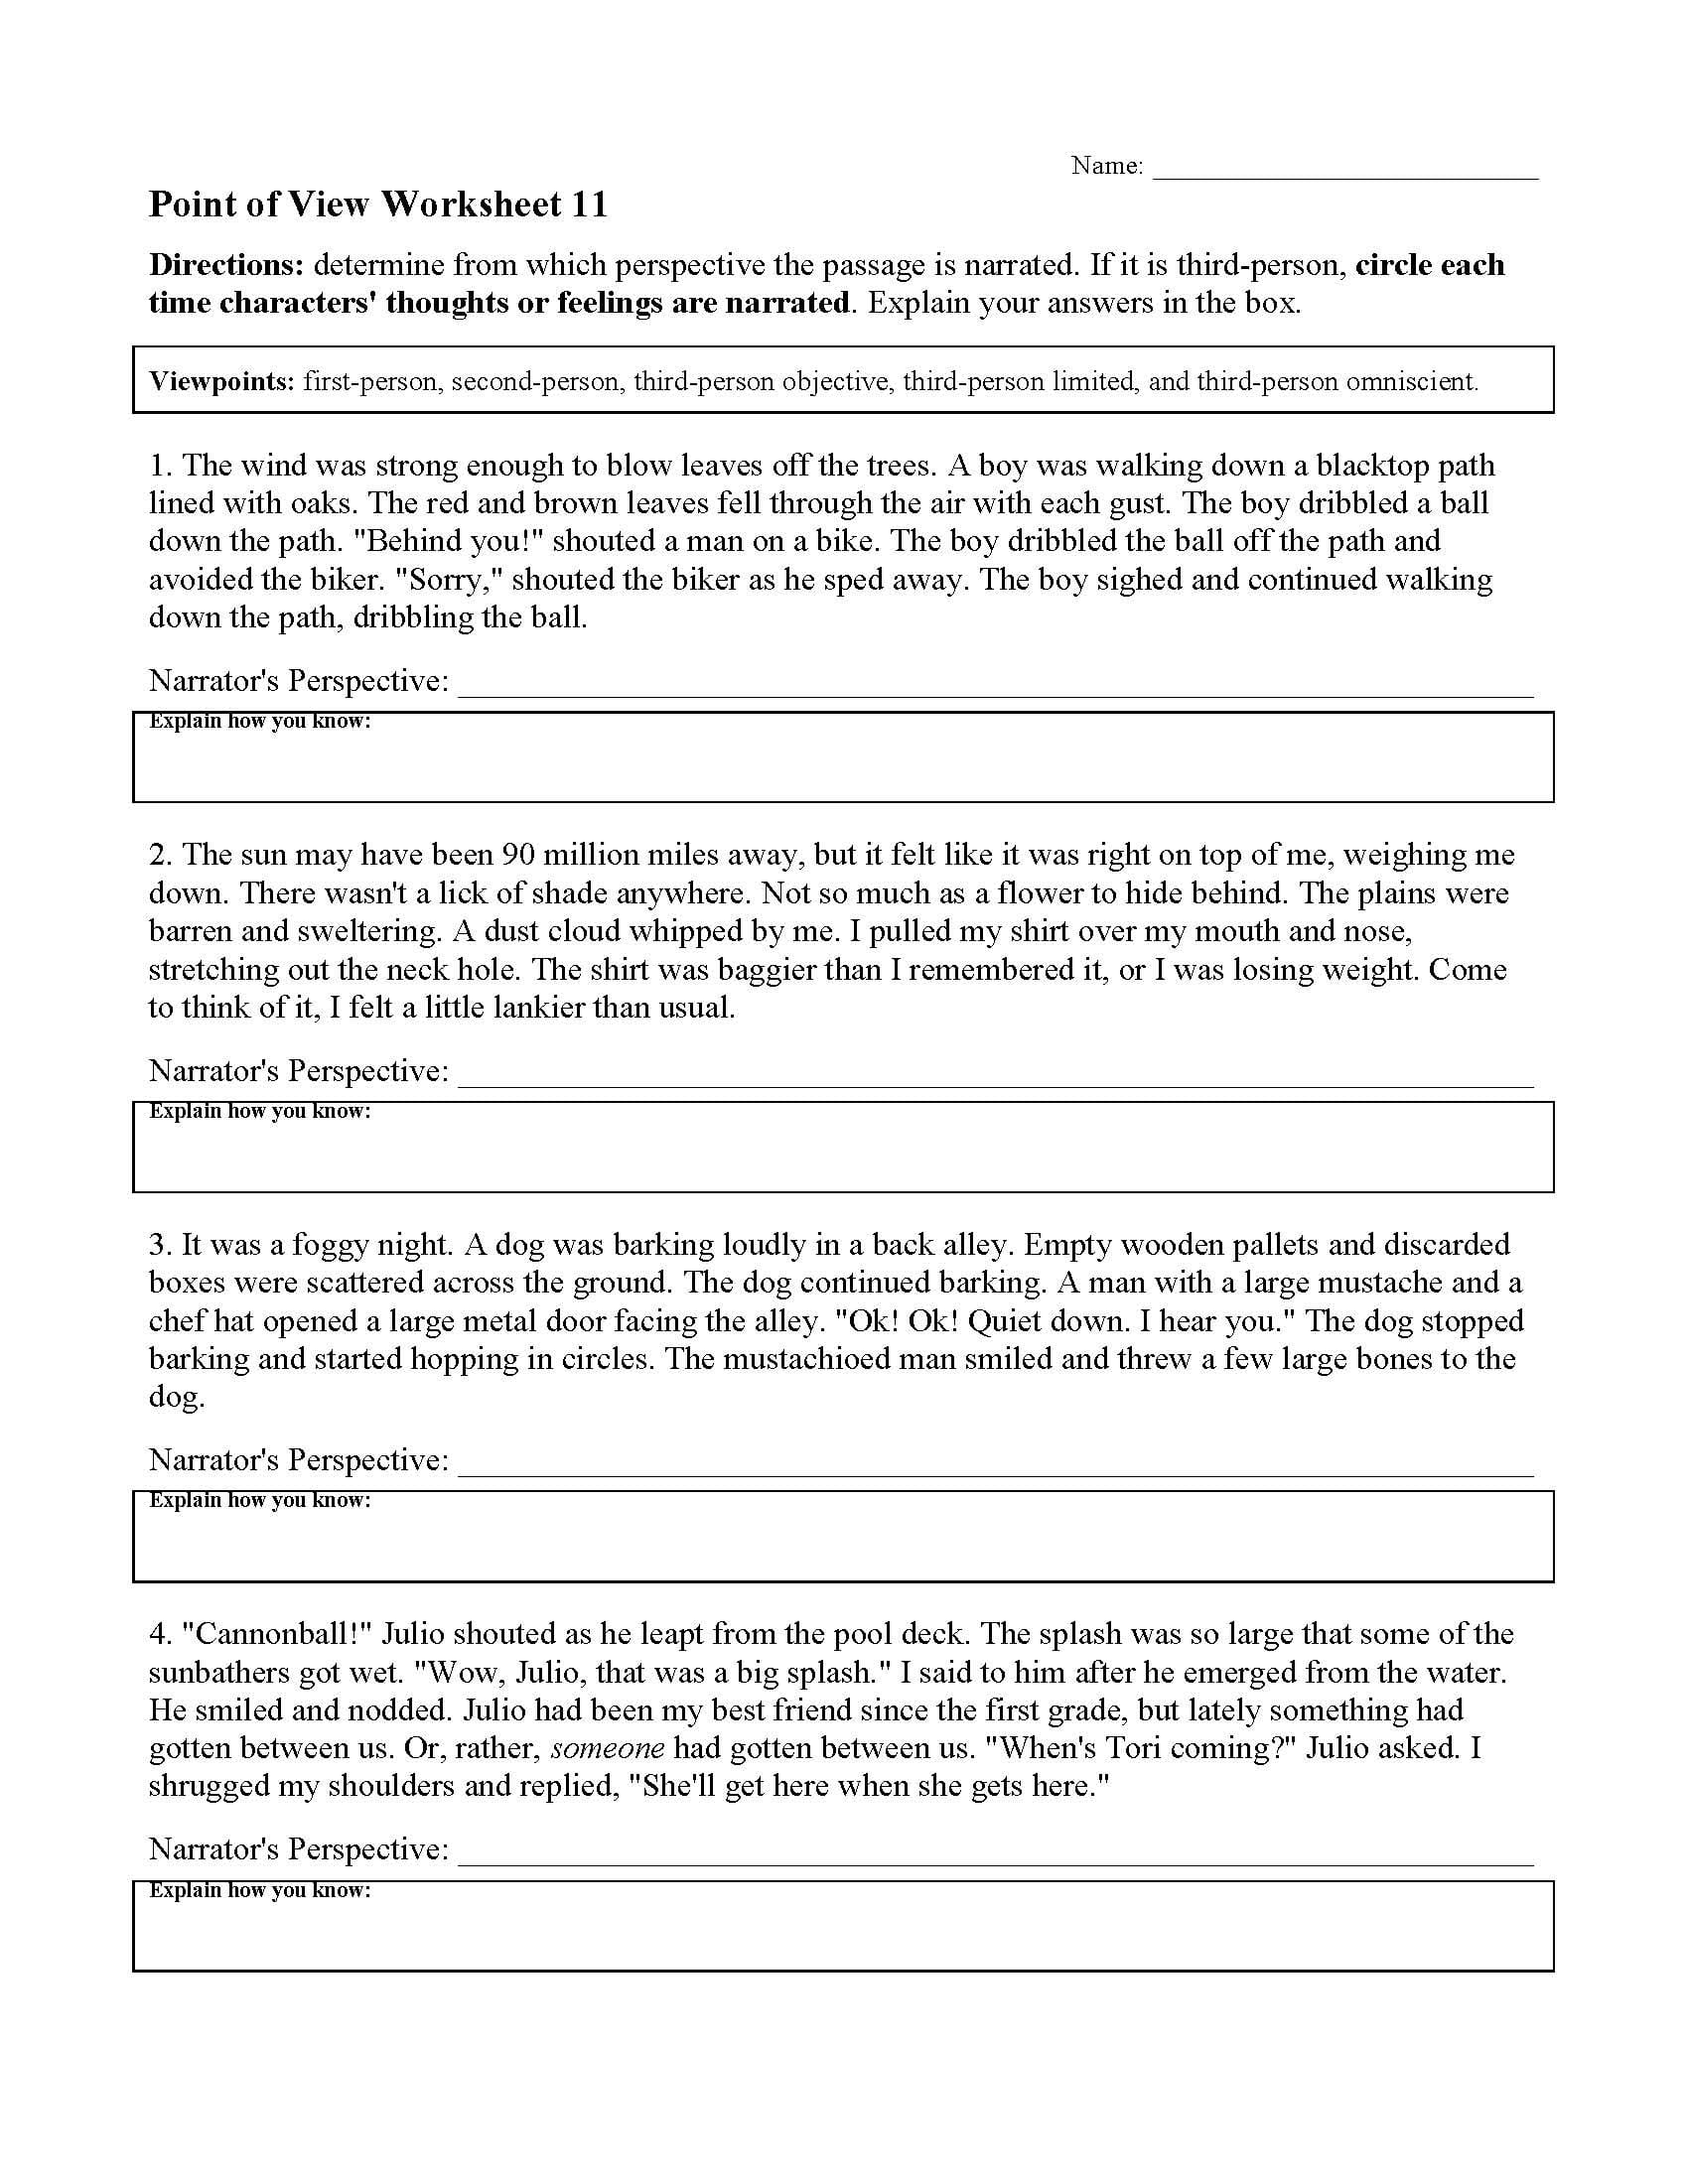 Point Of View Worksheet 11 Db excel